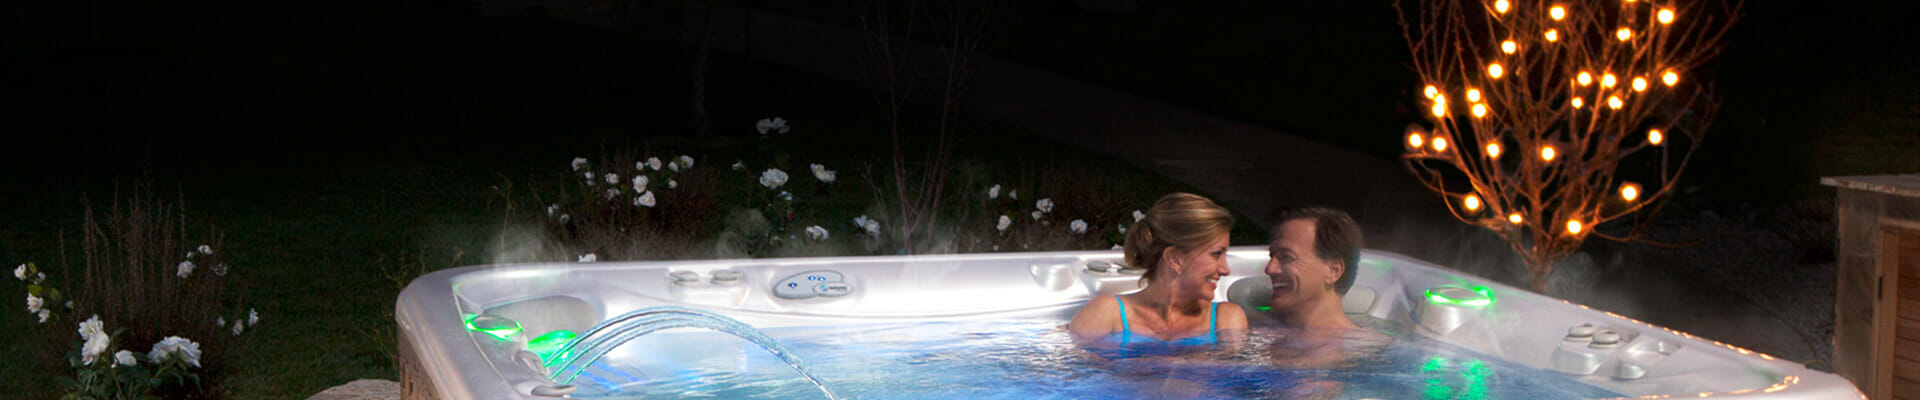 All Natural Stress Relief in Your Own Spa, Backyard Hot Tubs Verona WI